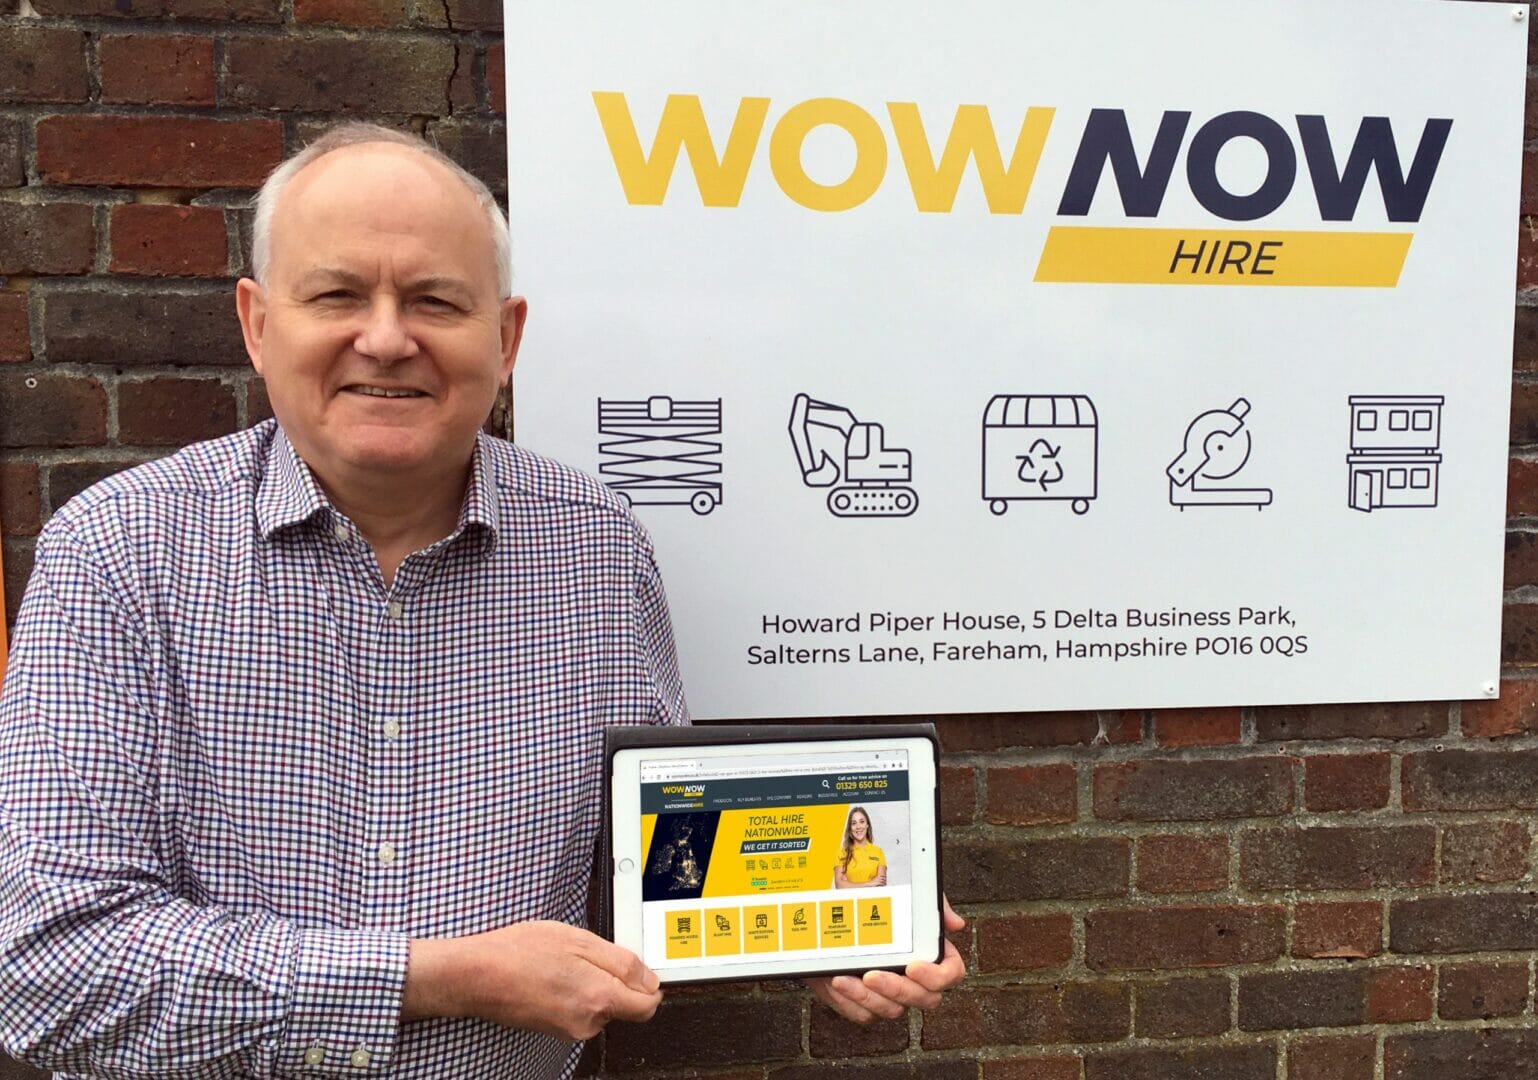 Construction equipment hire business aims to Wow with new name @WowNowHire